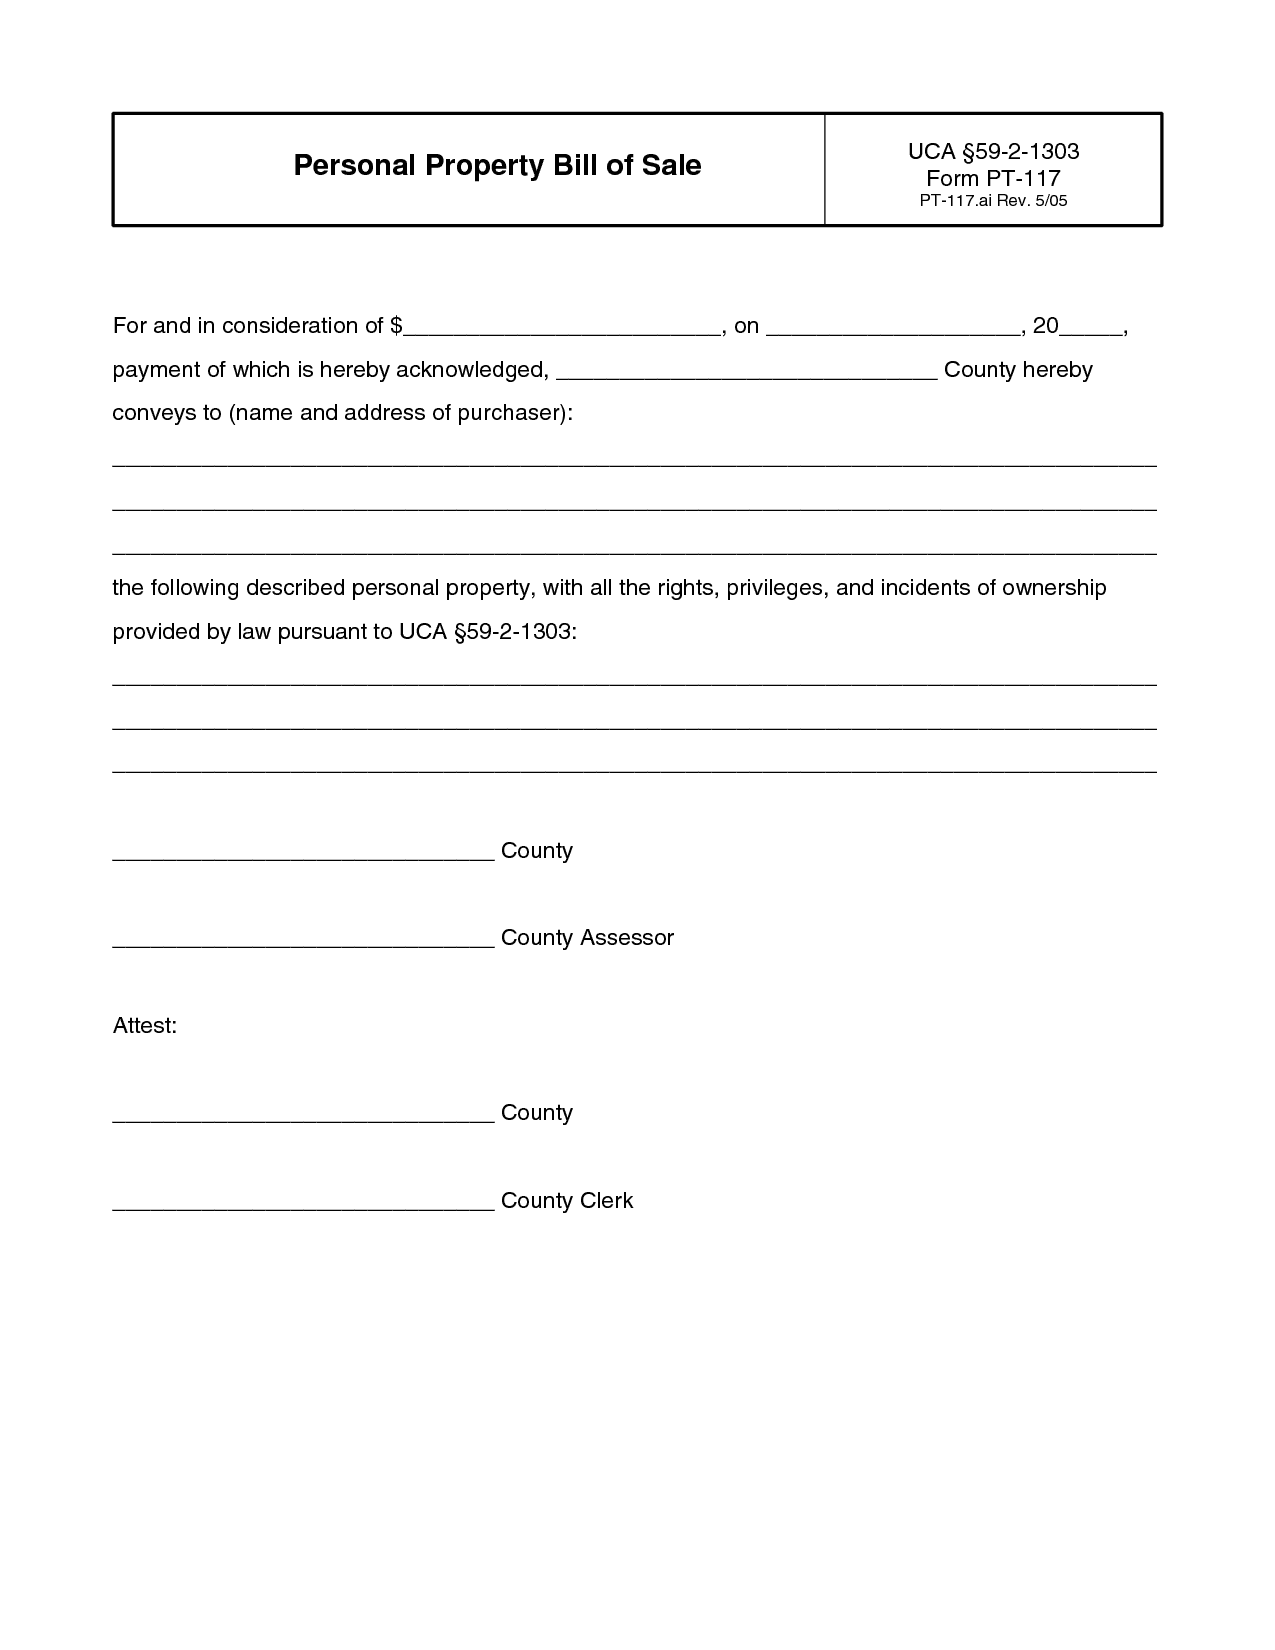 Sale of personal property form